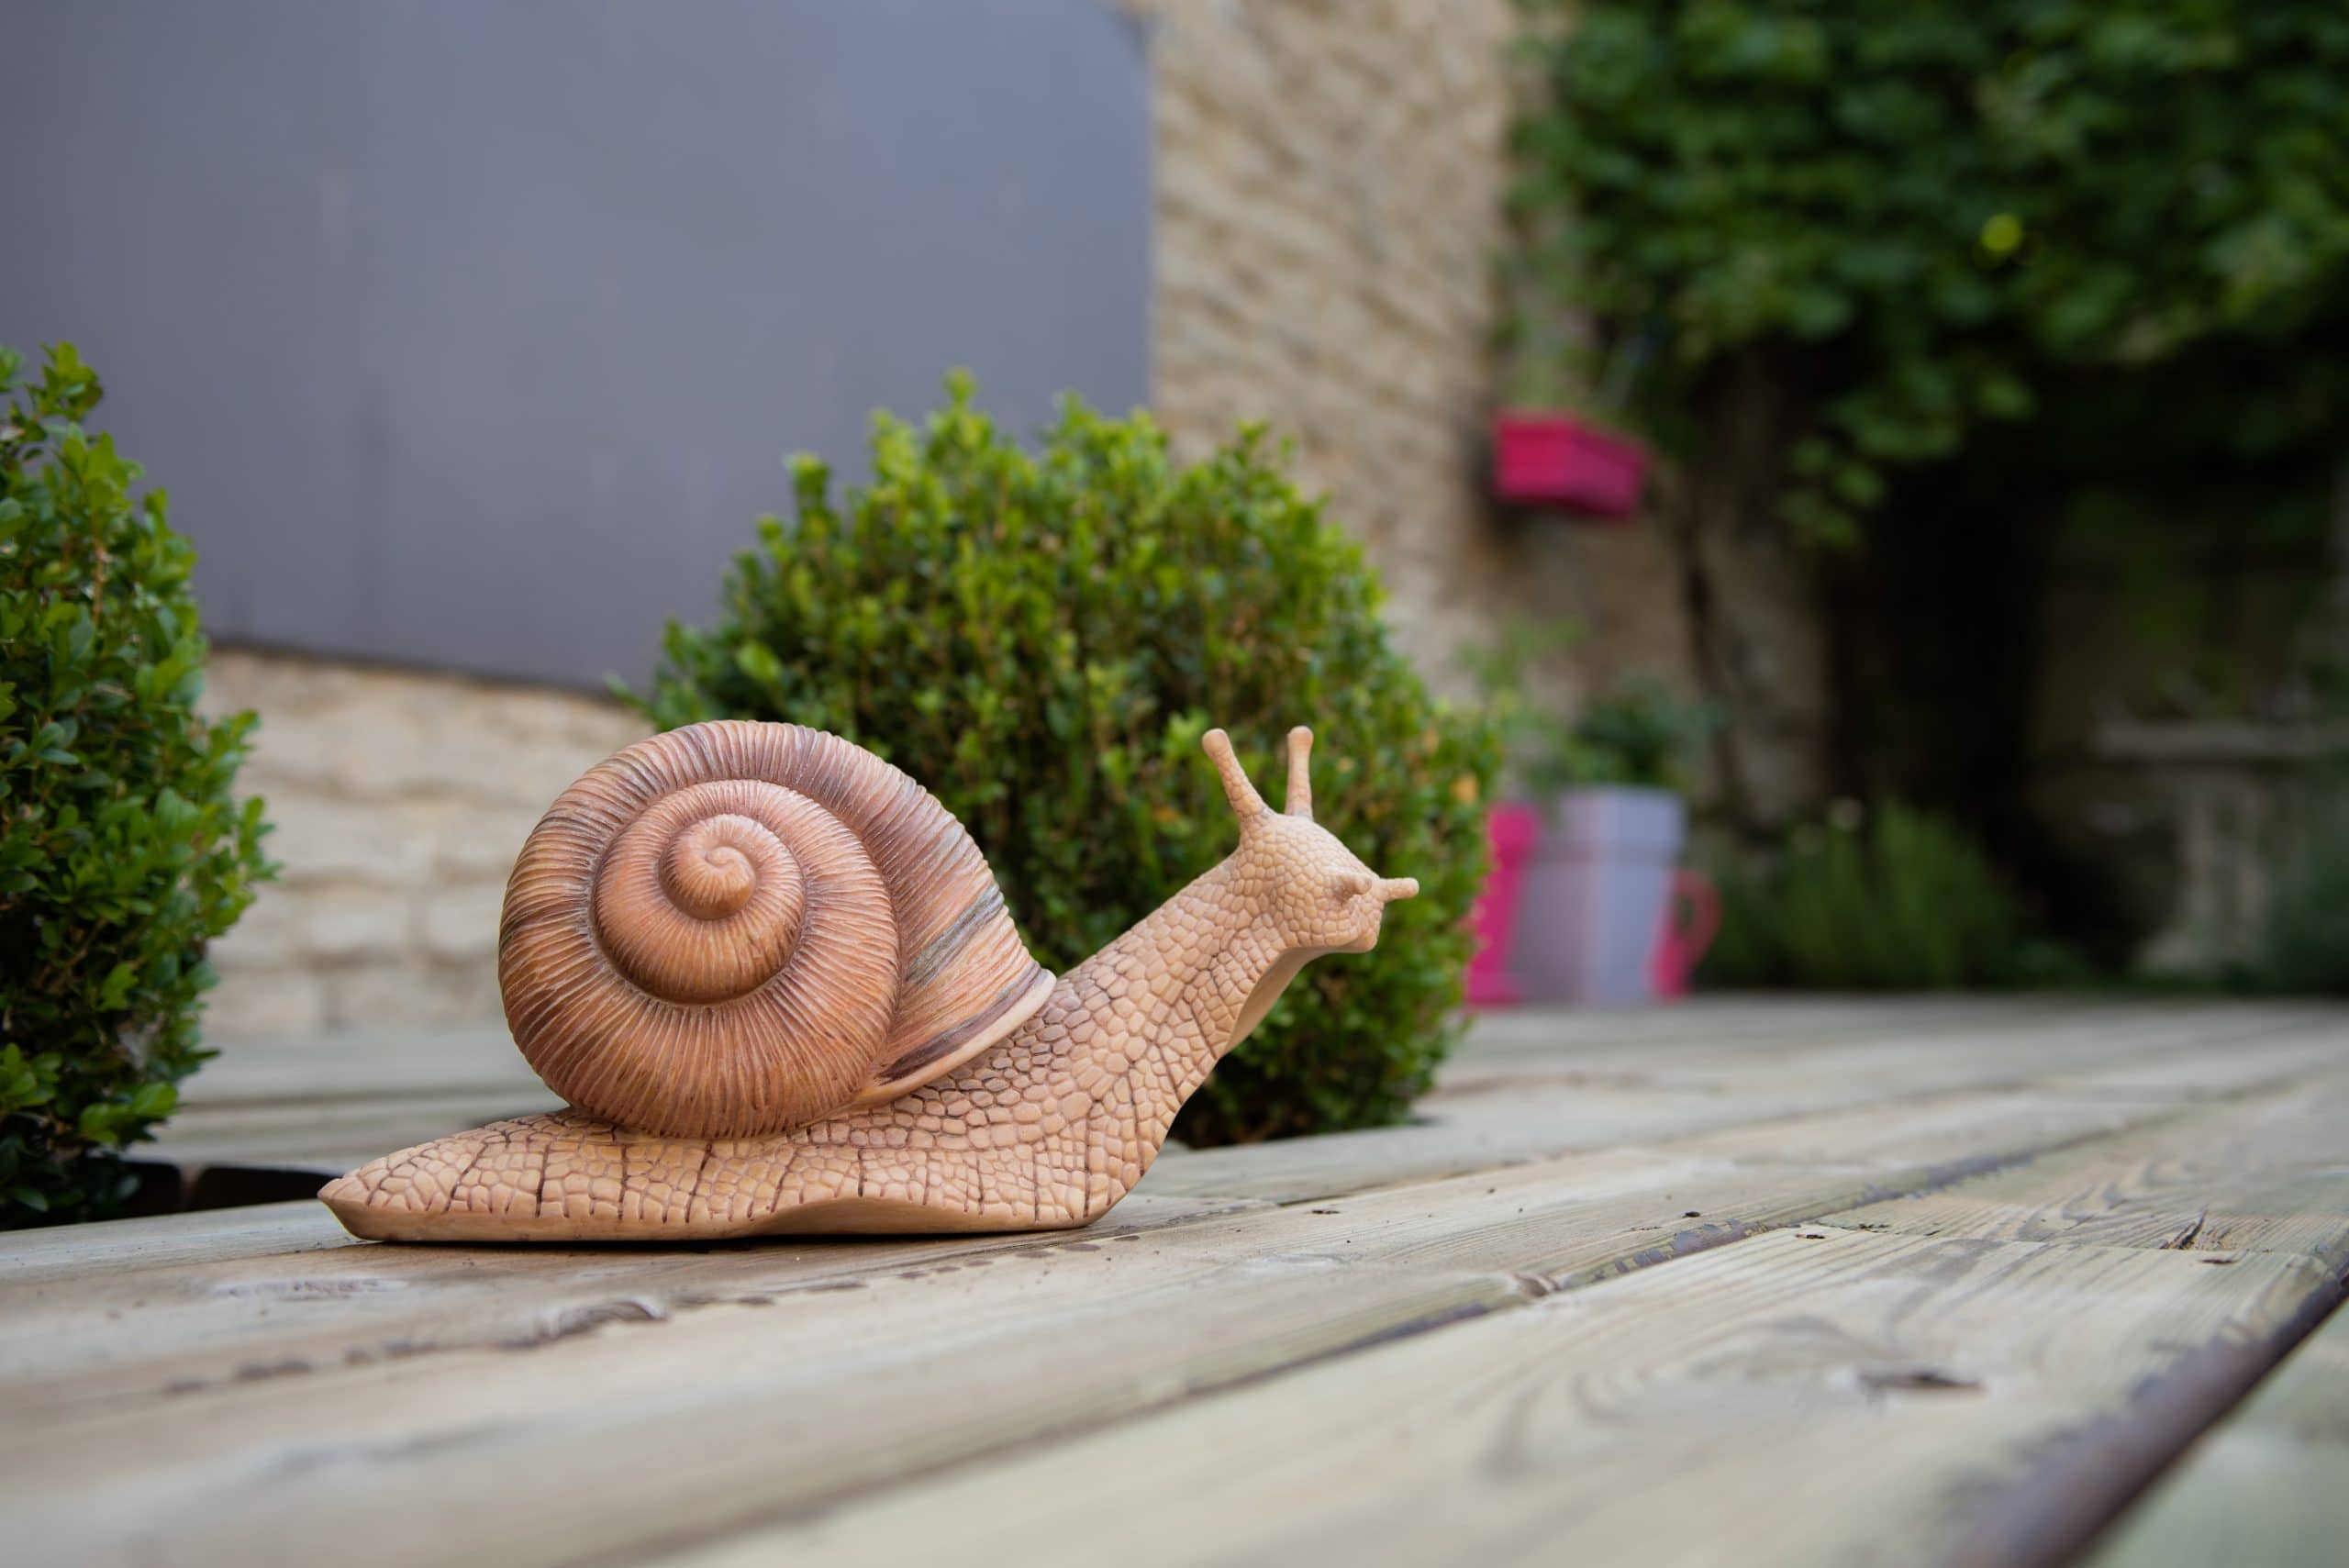 How To Find Snails In Your Backyard